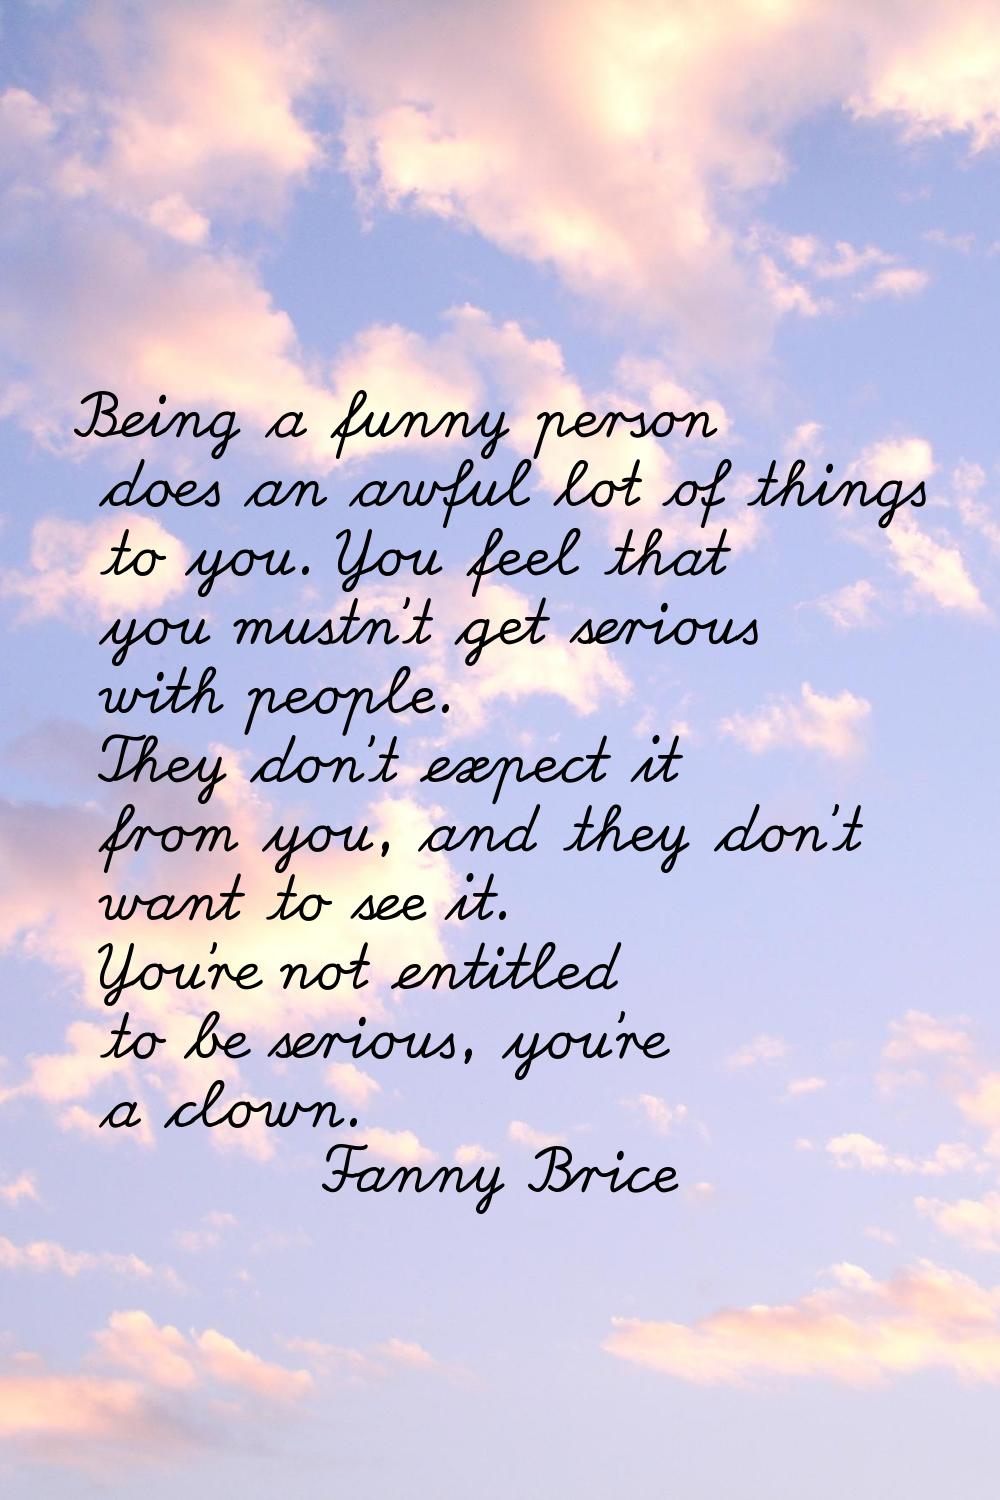 Being a funny person does an awful lot of things to you. You feel that you mustn't get serious with